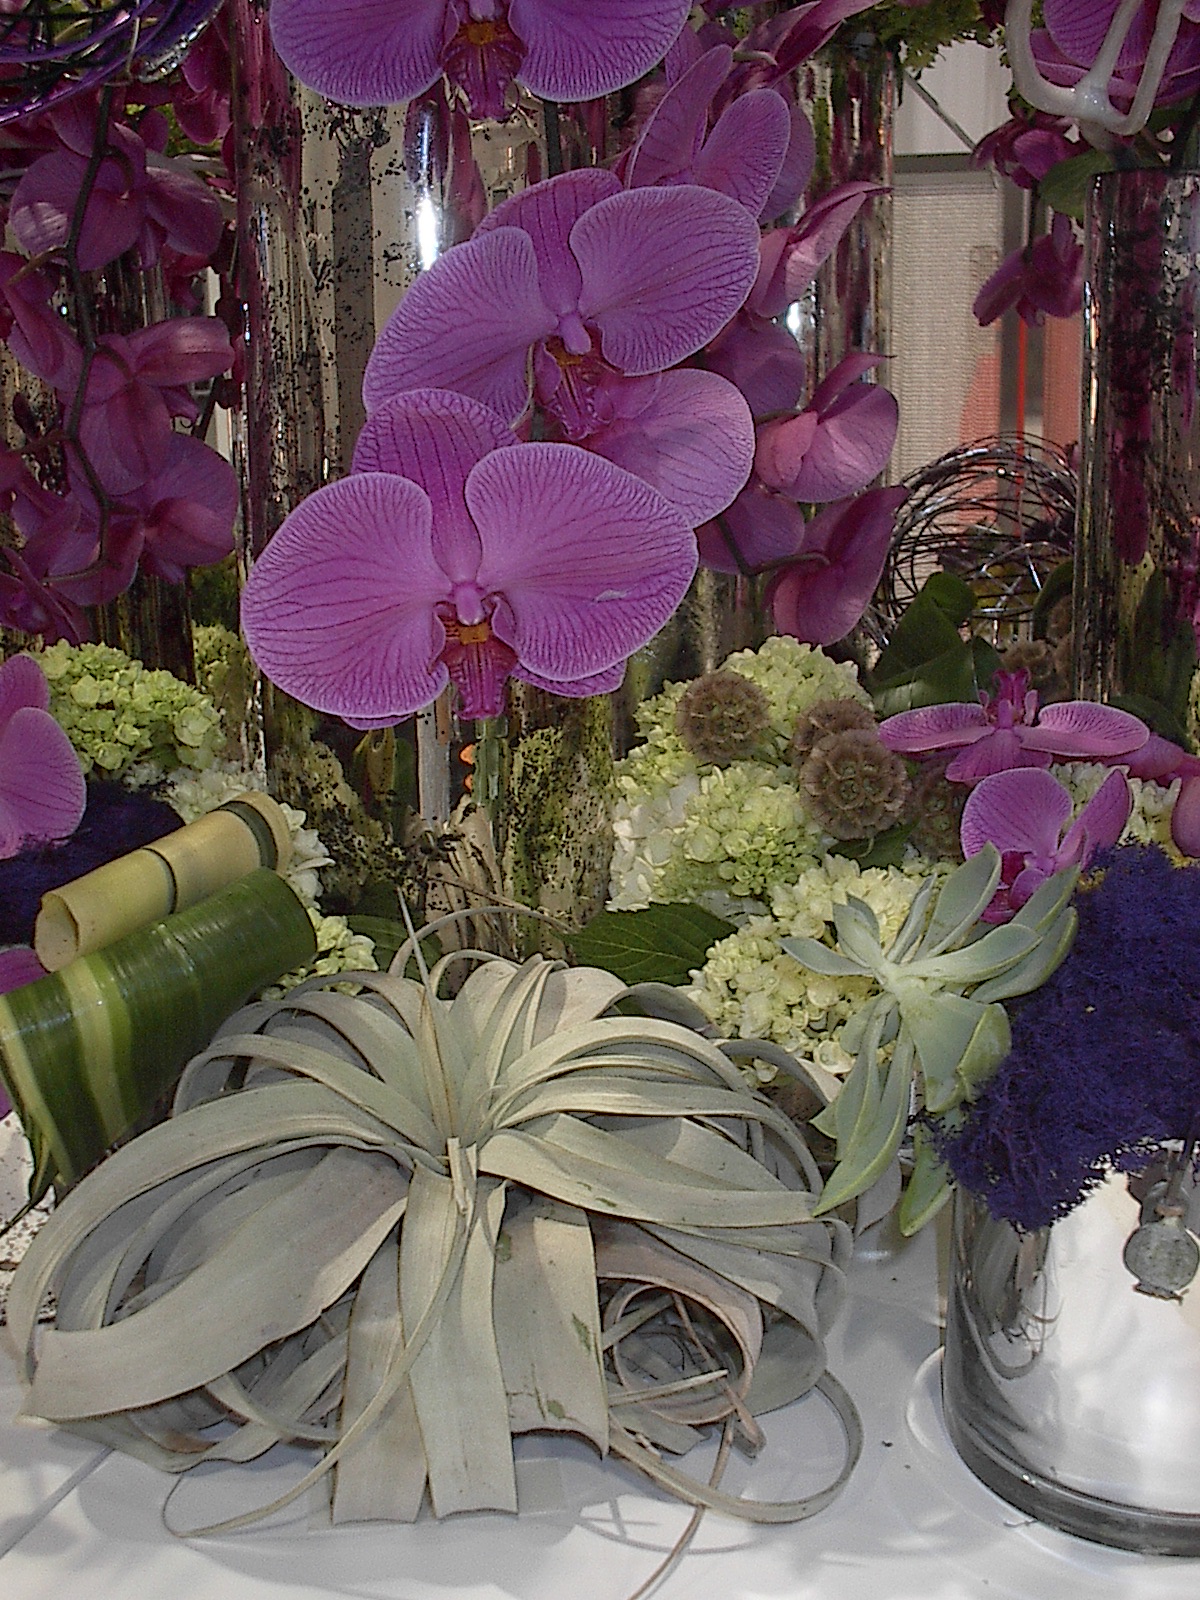 No job is too big, our custom flowers at the Las Vegas Convention Center, approved show florists.